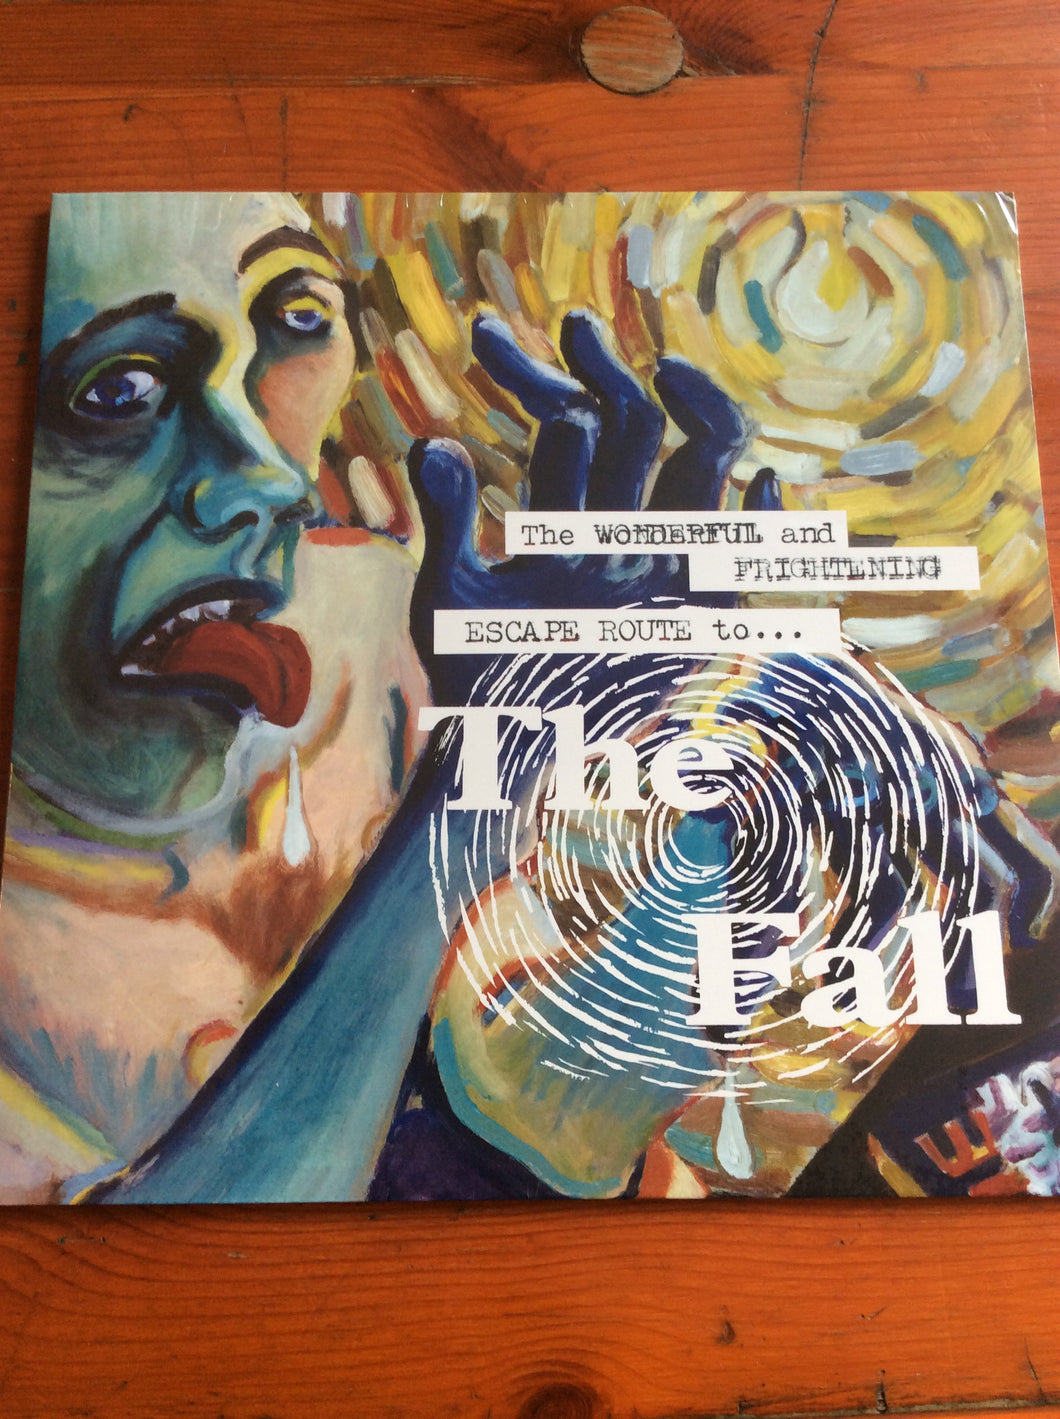 The Fall - The Wonderful And Frightening Escape Route To